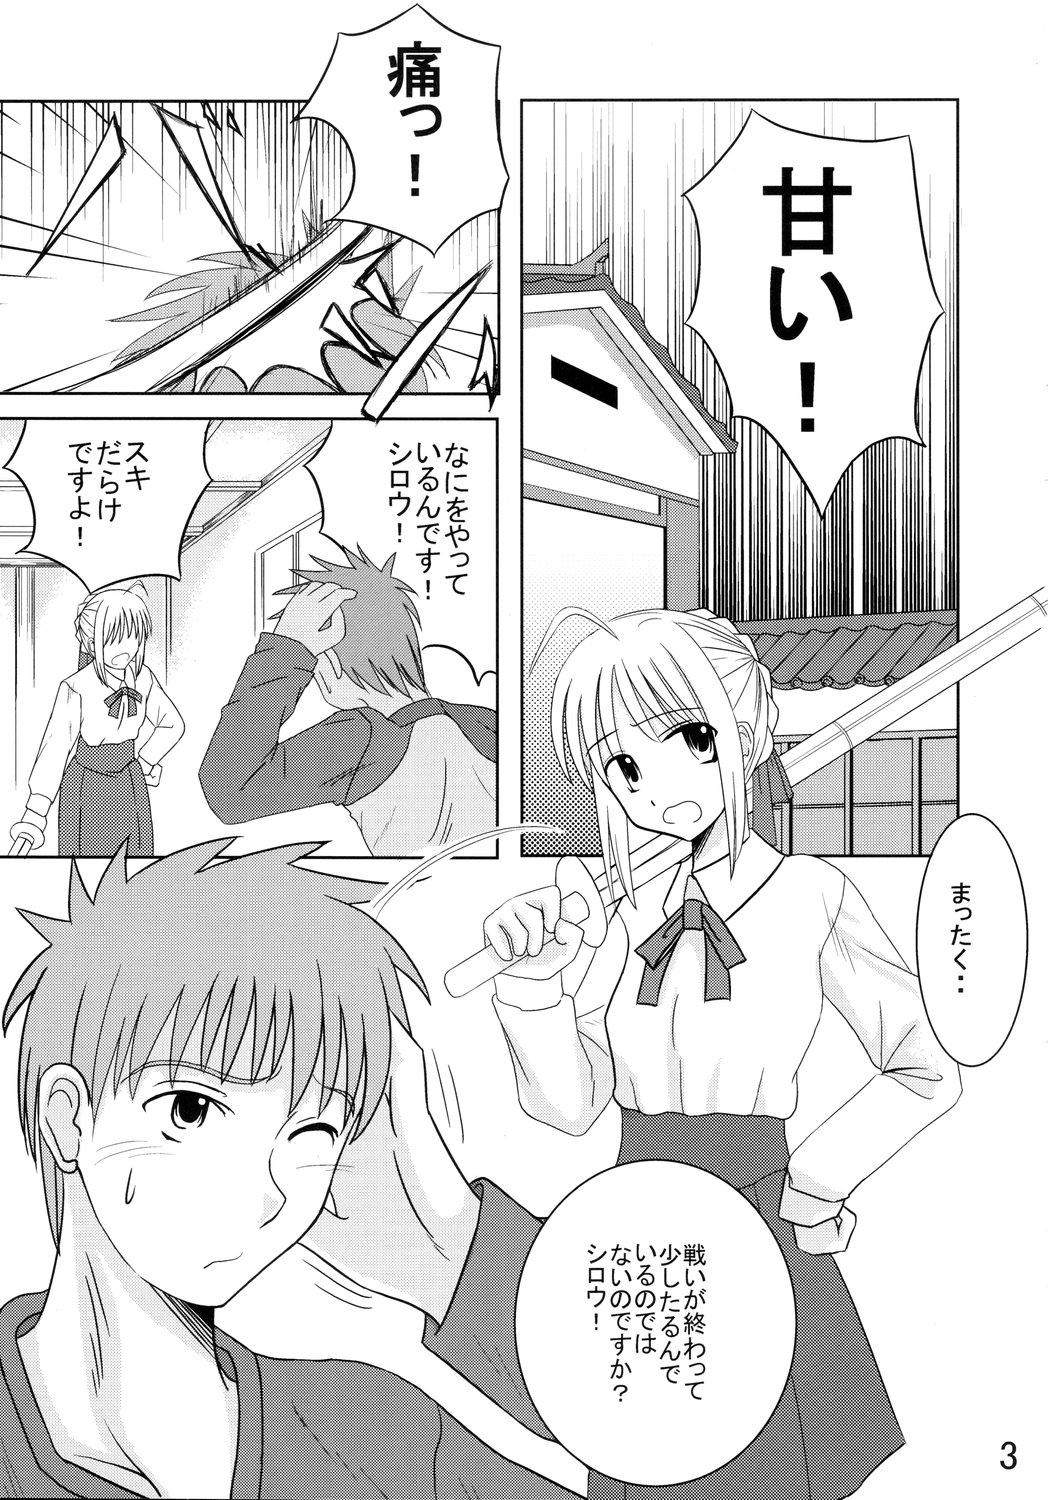 Cream Pie Saber Of Sanity - Fate stay night Lesbians - Page 2